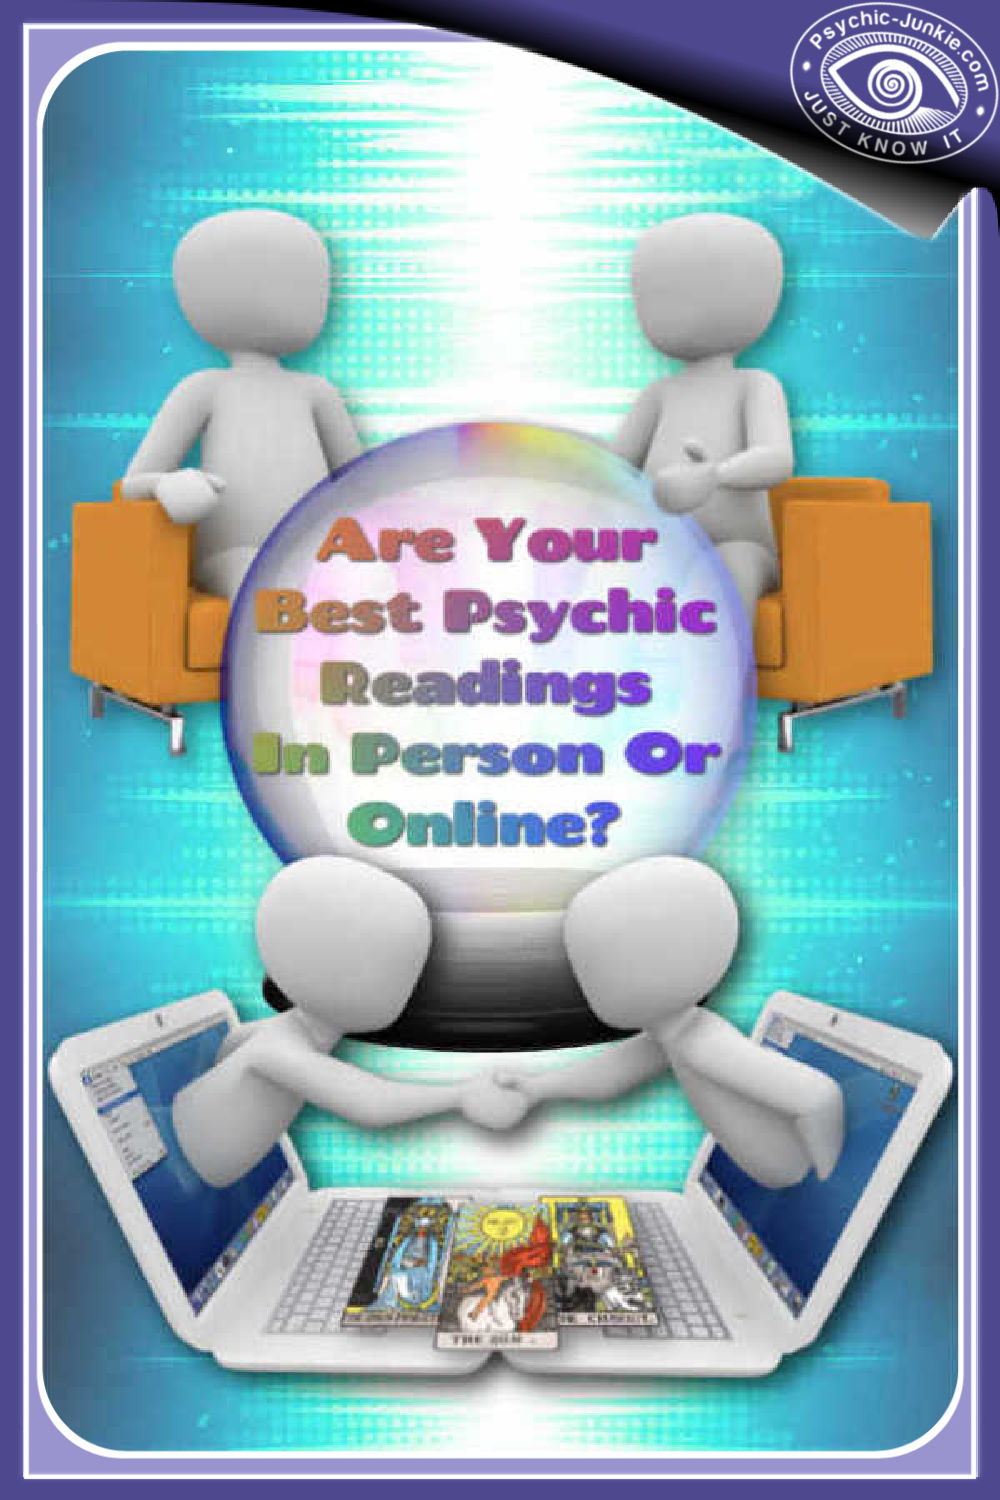 Are the best psychic consultations in person or online?